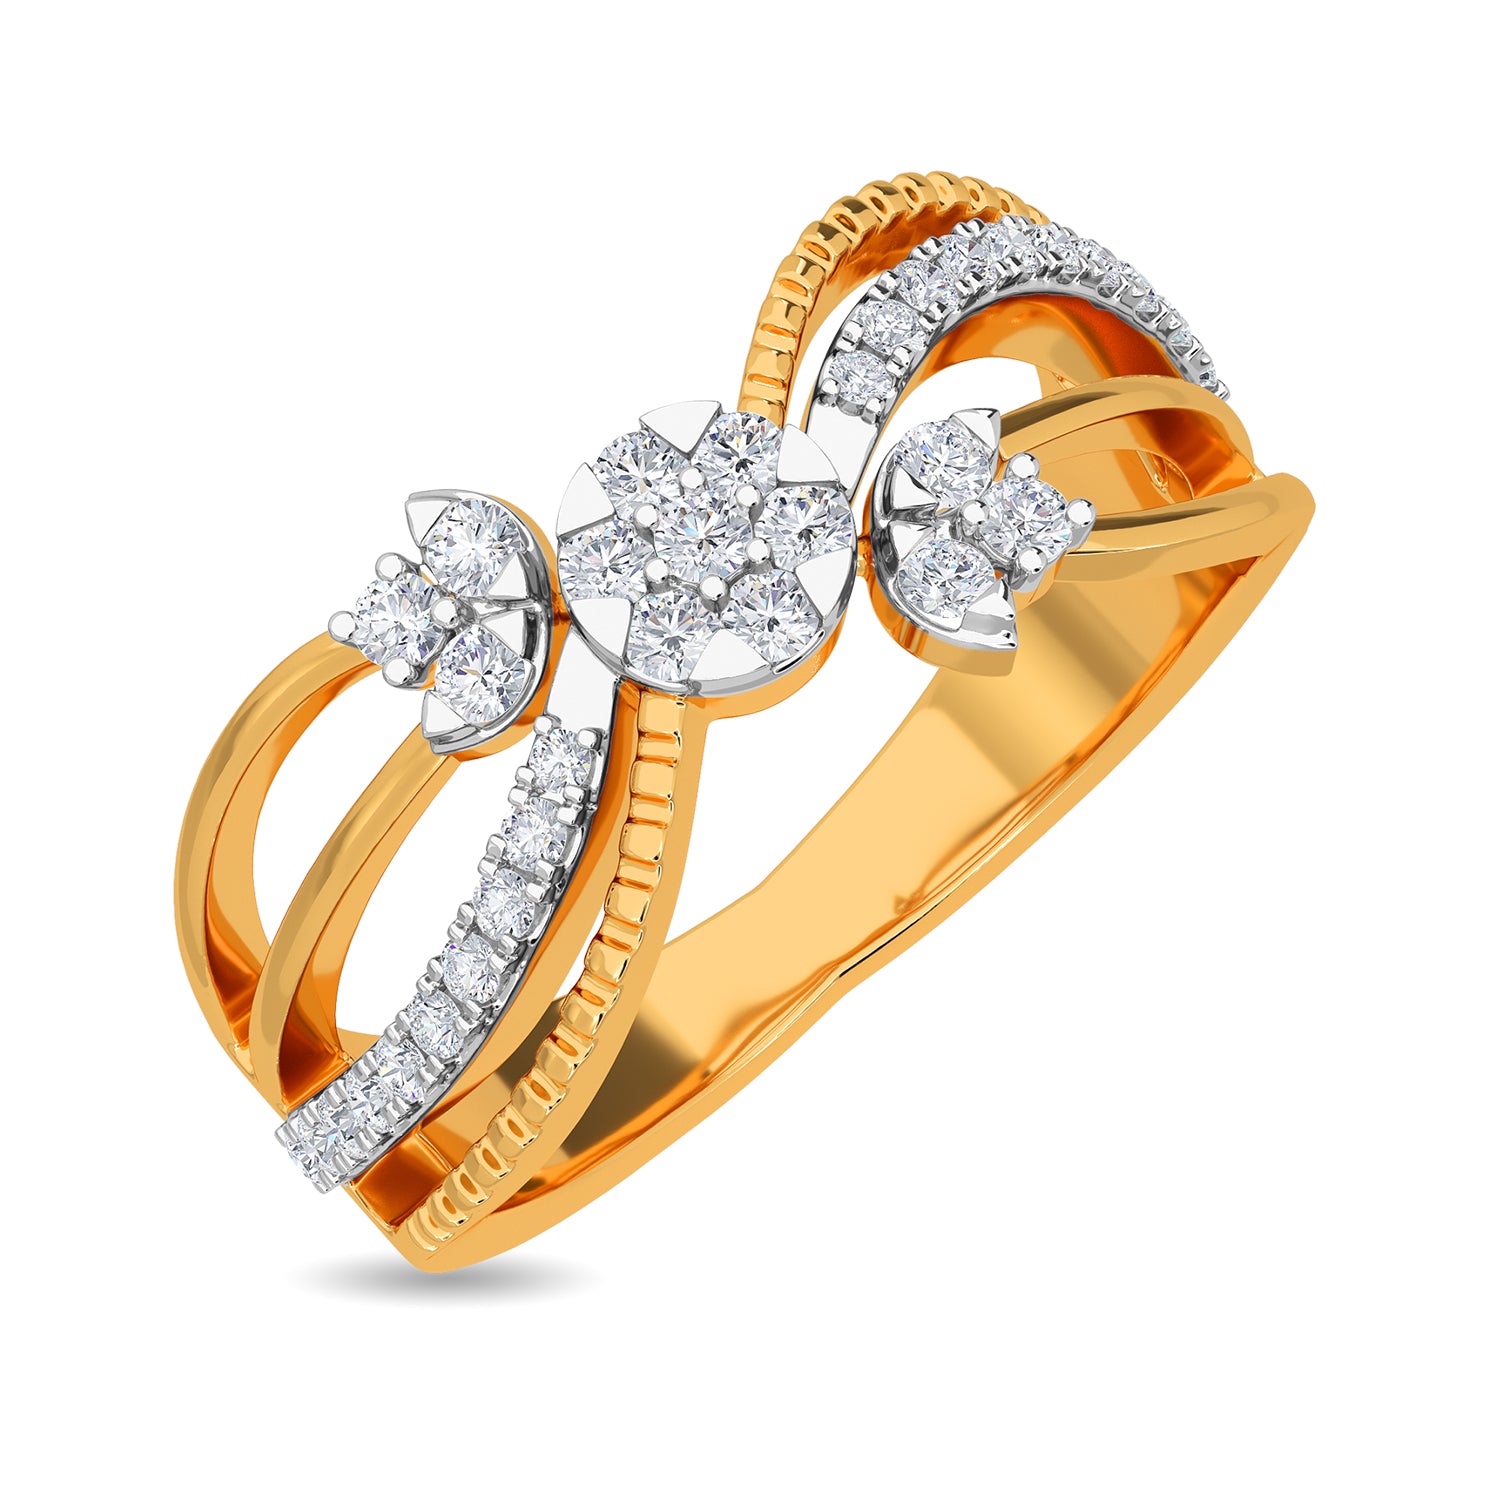 Engagement Rings for Sale Online - Othergems